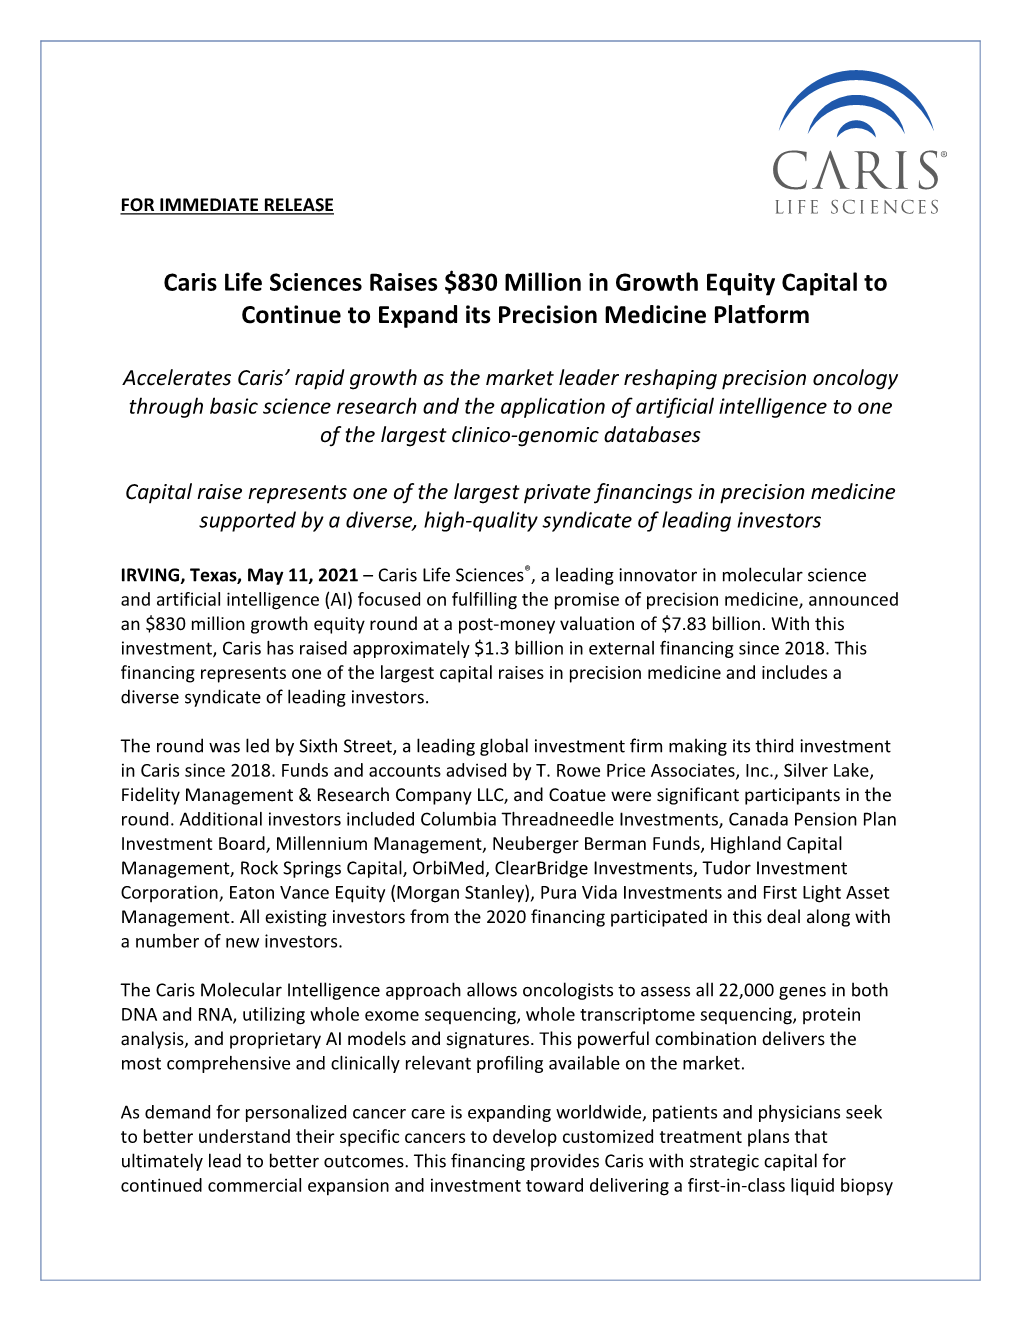 Caris Life Sciences Raises $830 Million in Growth Equity Capital to Continue to Expand Its Precision Medicine Platform